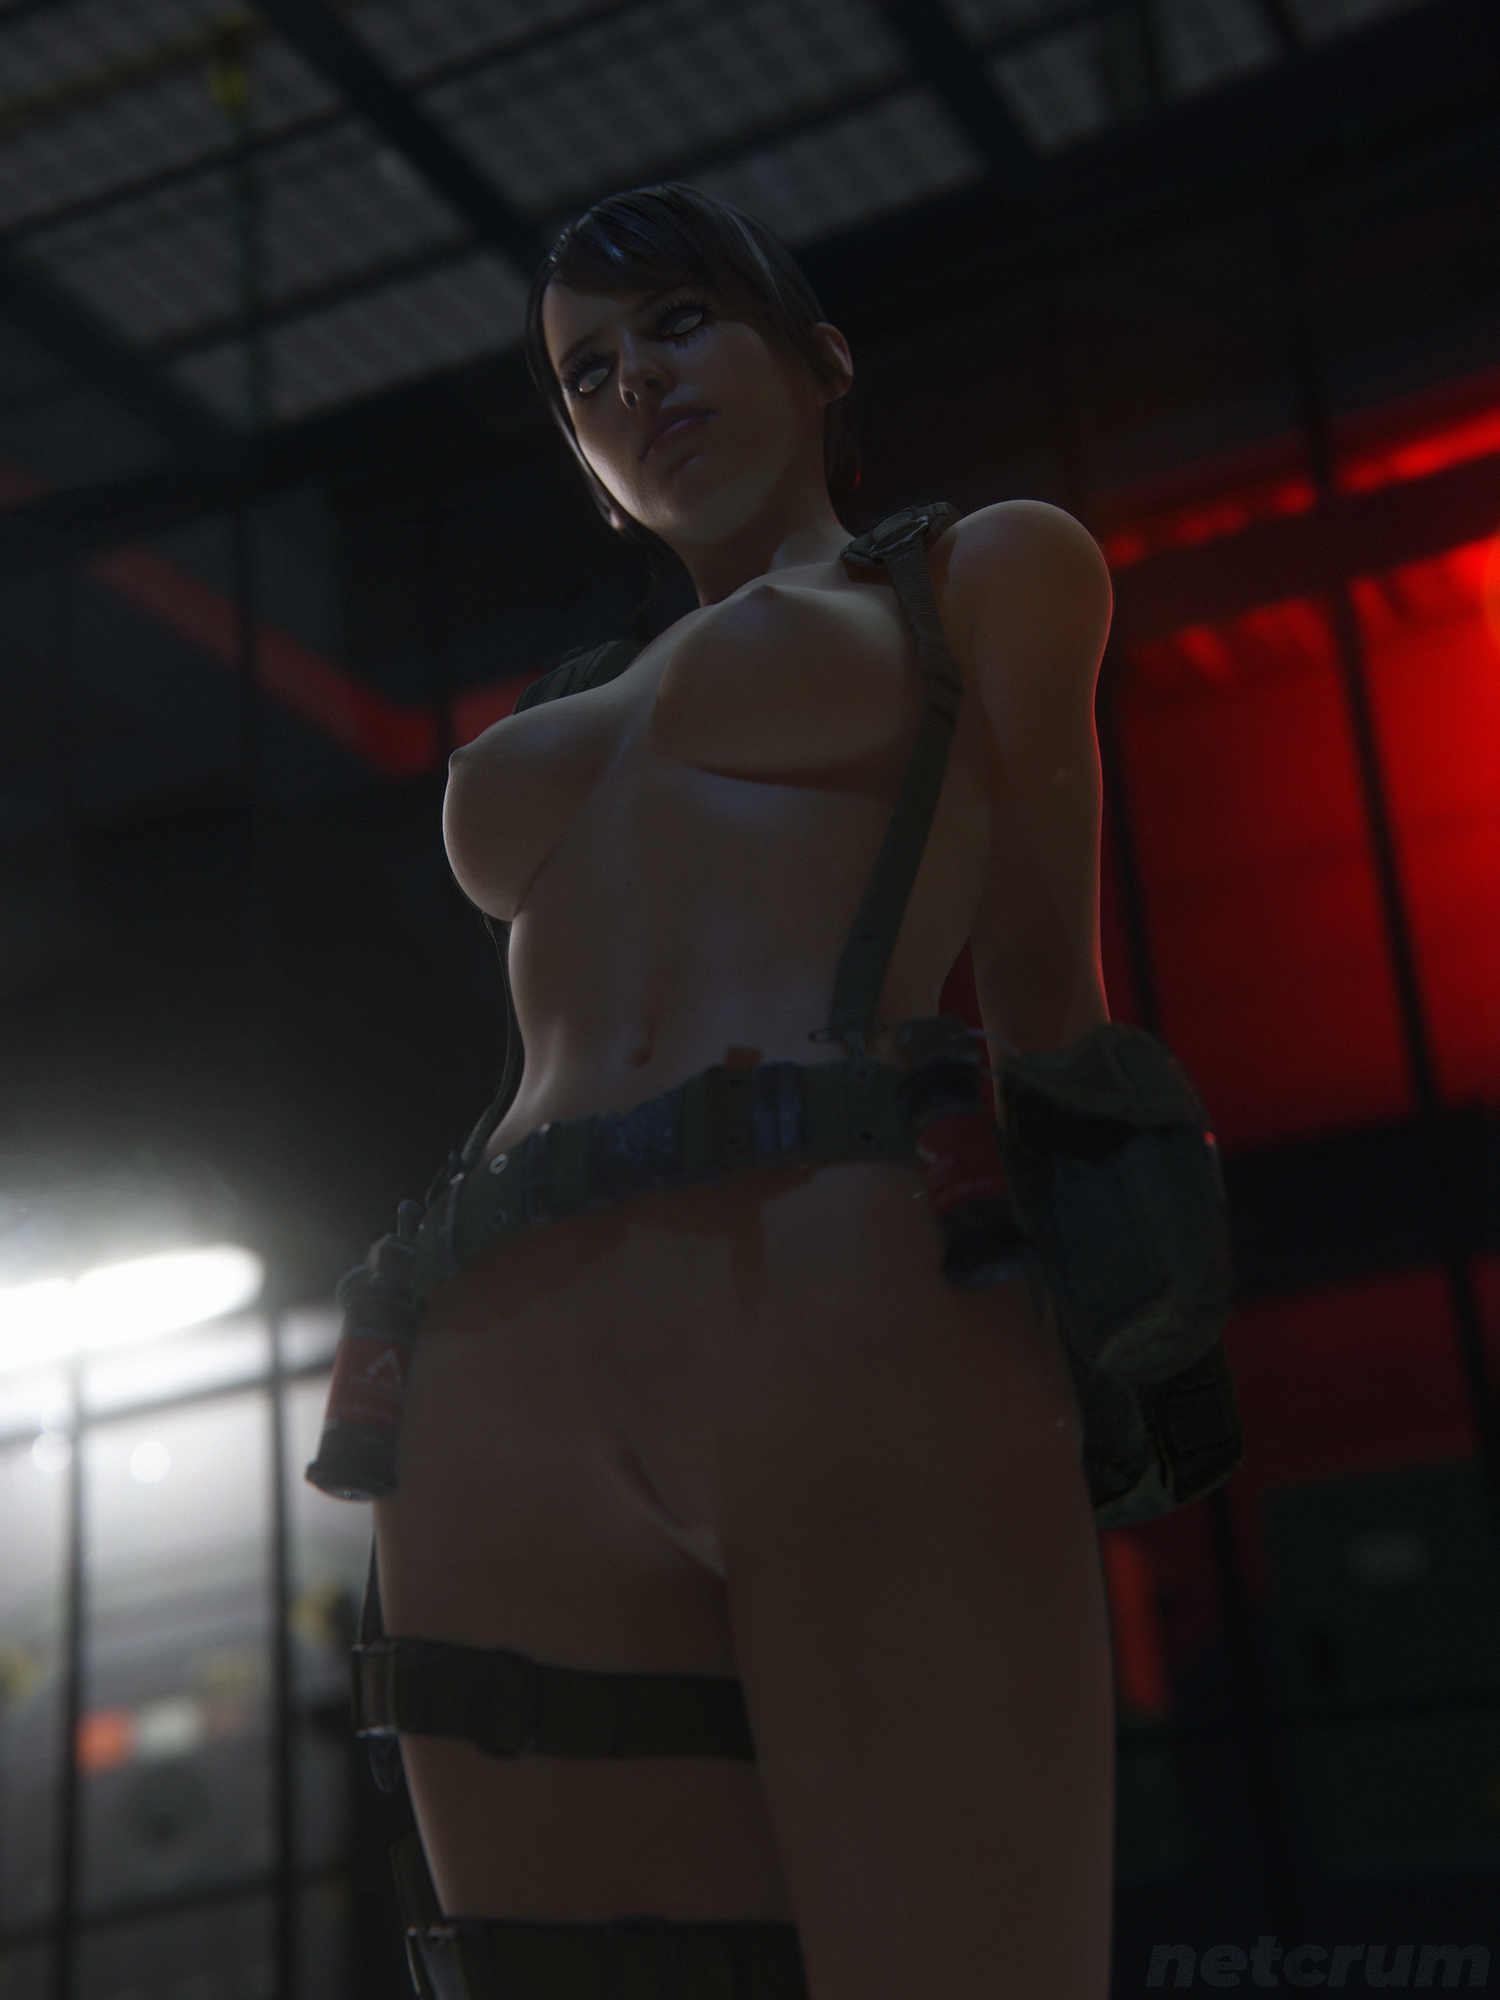 Quiet found you in her cell Quiet Metal Gear Solid 3d Porn 3d Girl Rule34 3dnsfw R34 Rule 34 Blender3d Big Breasts Natural Boobs Boobs Big boobs Breasts Natural Breast Naked Pussy Pose Nipples Nude In The Nude Bikini 2